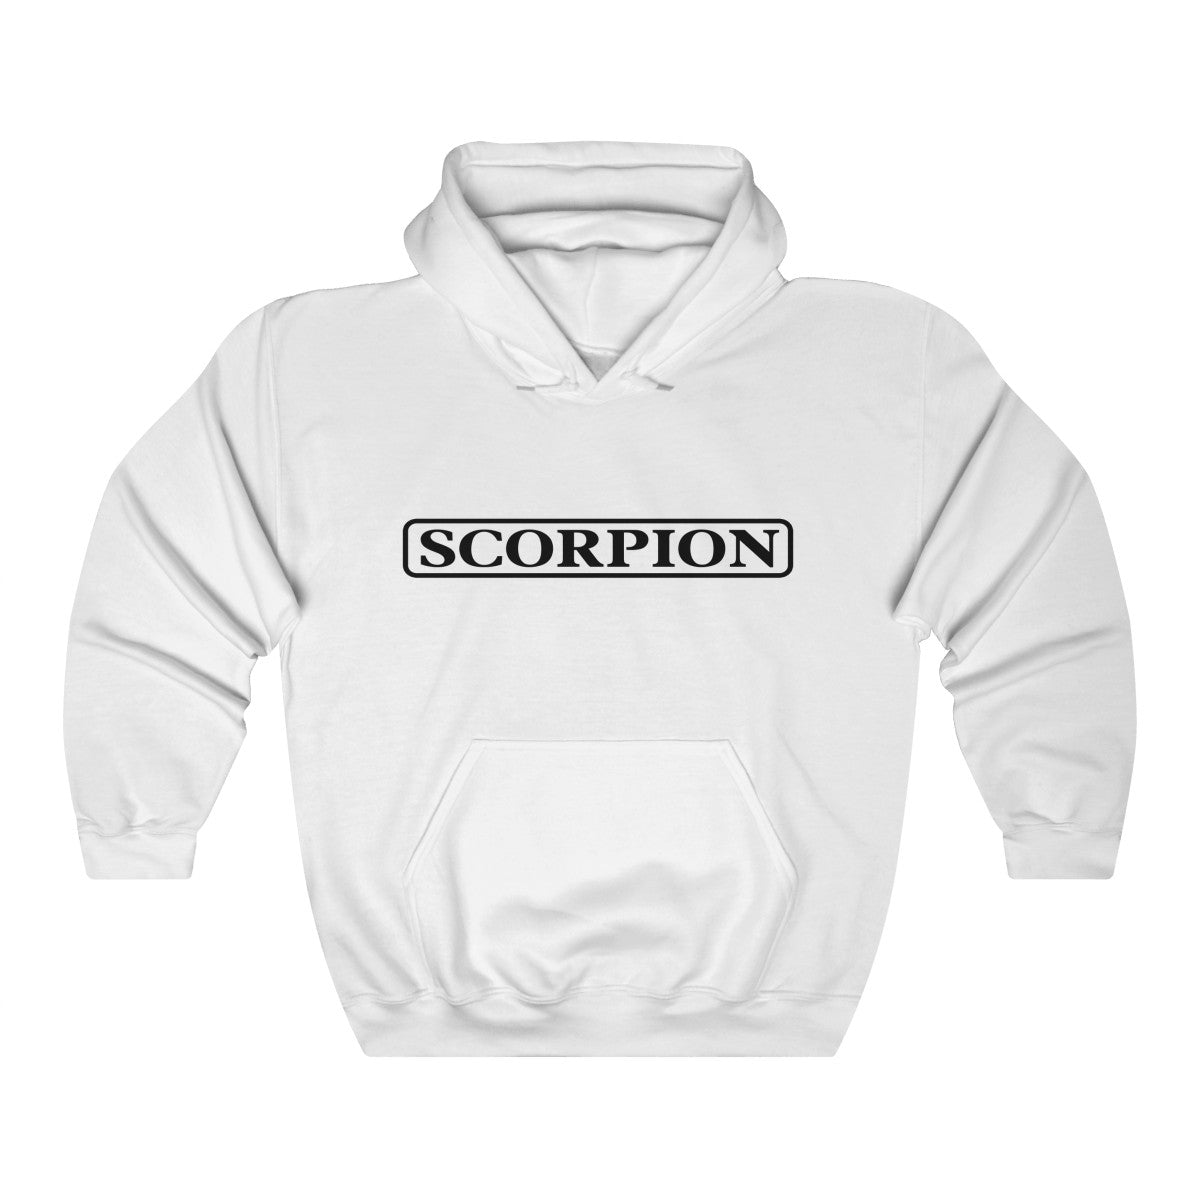 Scorpion Drizzy Drake Scary Hours Merch Inspired Heavy Blend™ Hoodie-White-L-Archethype